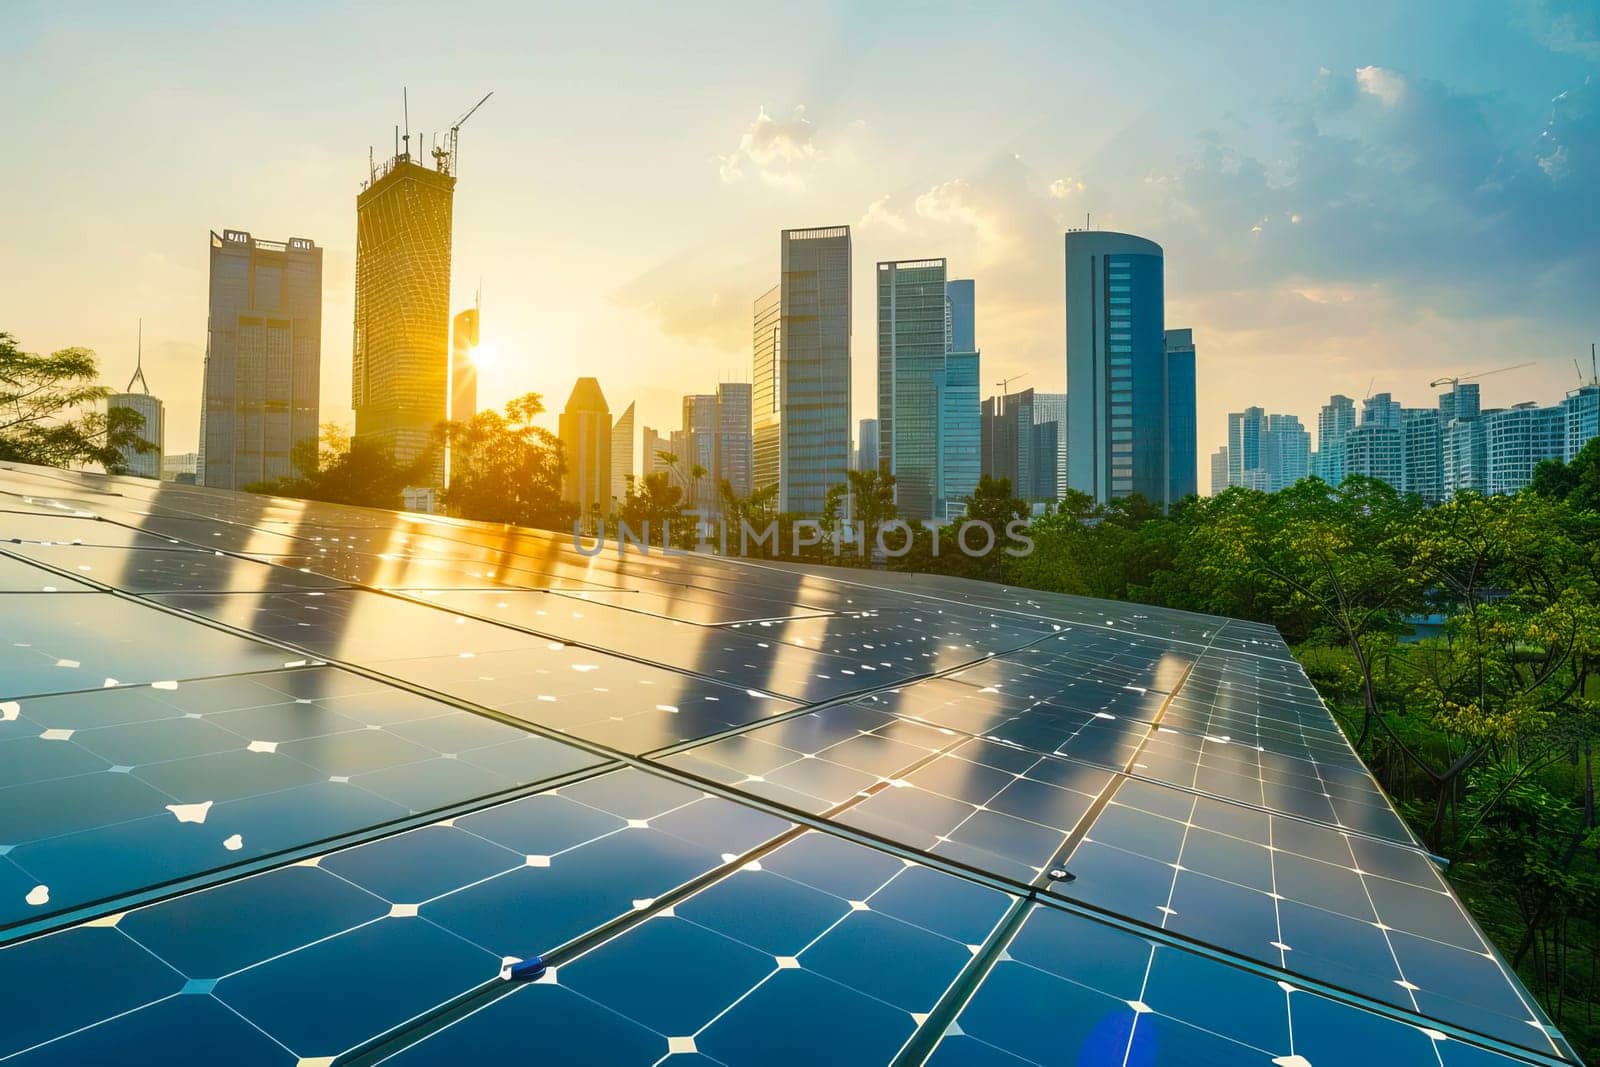 A solar panel positioned in front of a modern city skyline with towering skyscrapers.